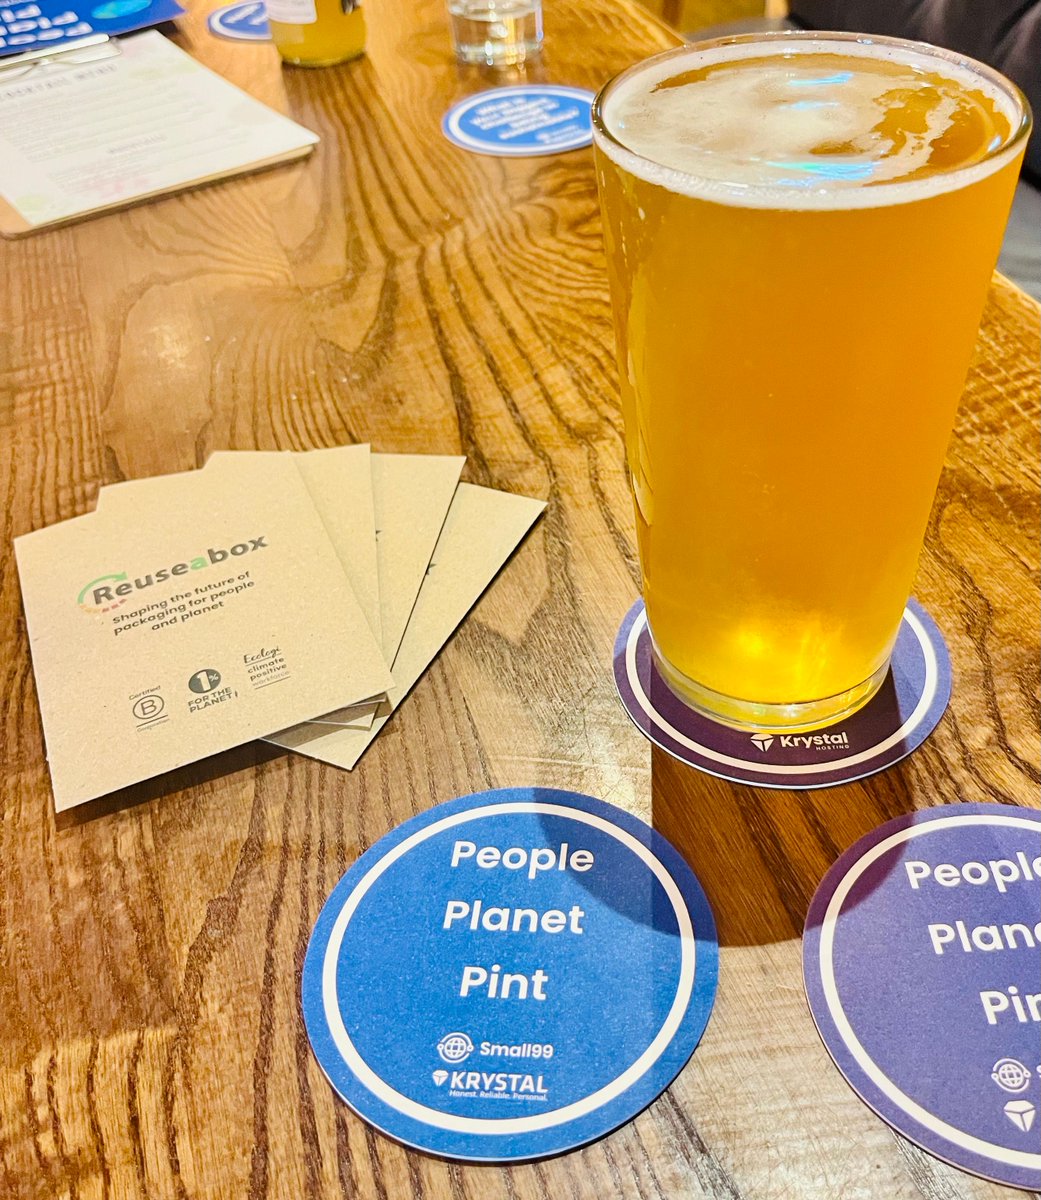 Some great conversations at last night's #PeoplePlanetPint in #Lincoln. 

Thank you to those who joined us and to @KrystalHosting for the free drinks 🍺

Our next one will be early next year and look forward to engaging with more people about #sustainability 🌎 @small99uk